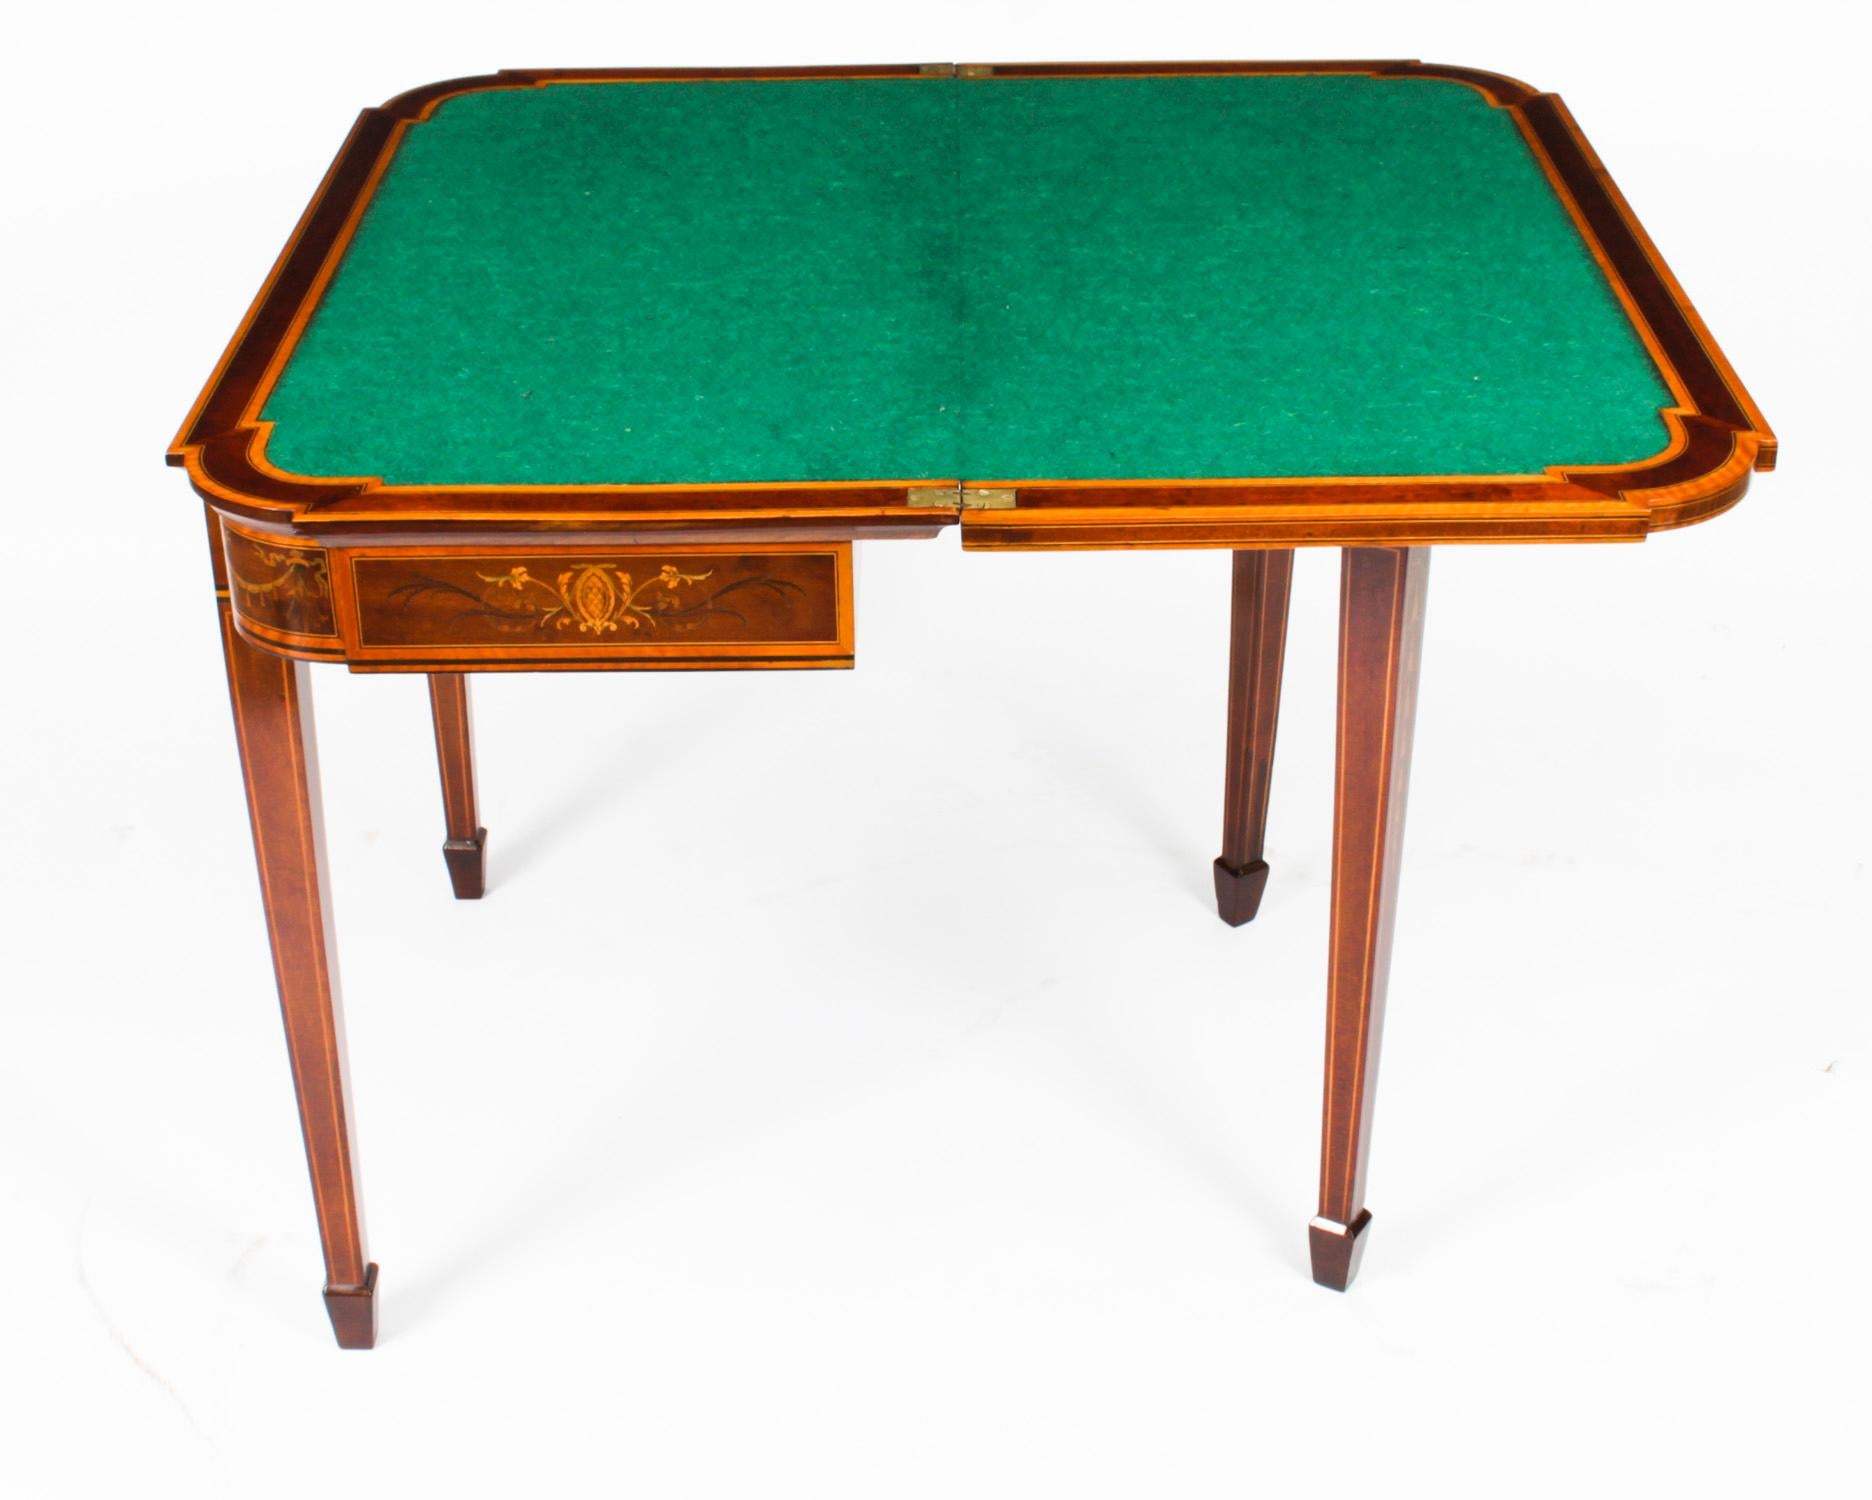 Antique Victorian Mahogany & Inlaid Card Games Table 19th Century For Sale 1